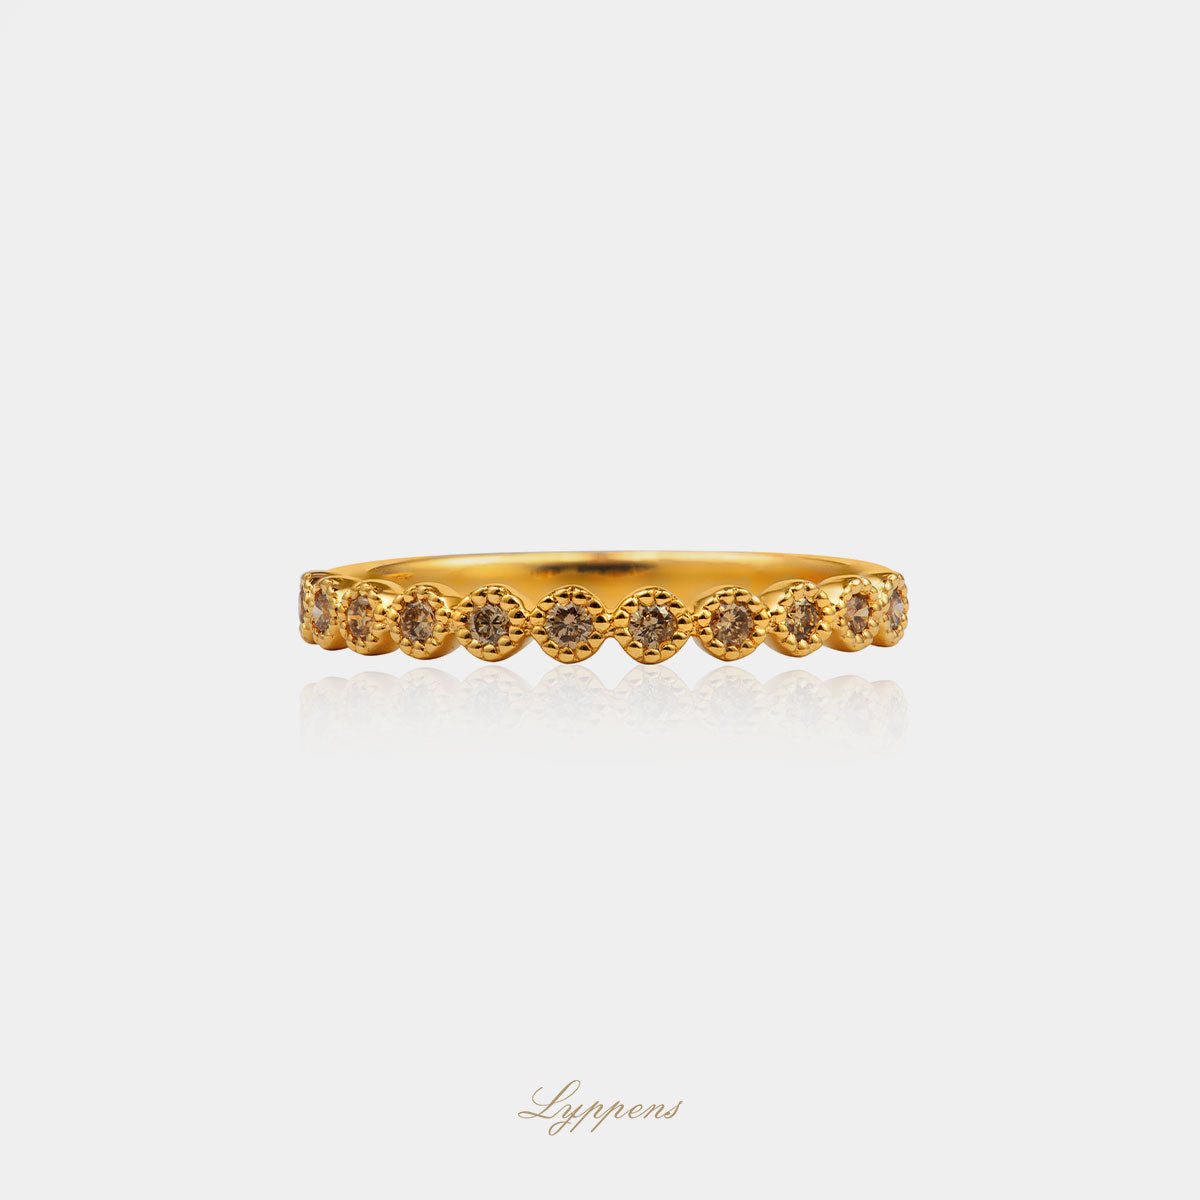 Yellow gold row ring with brown diamond